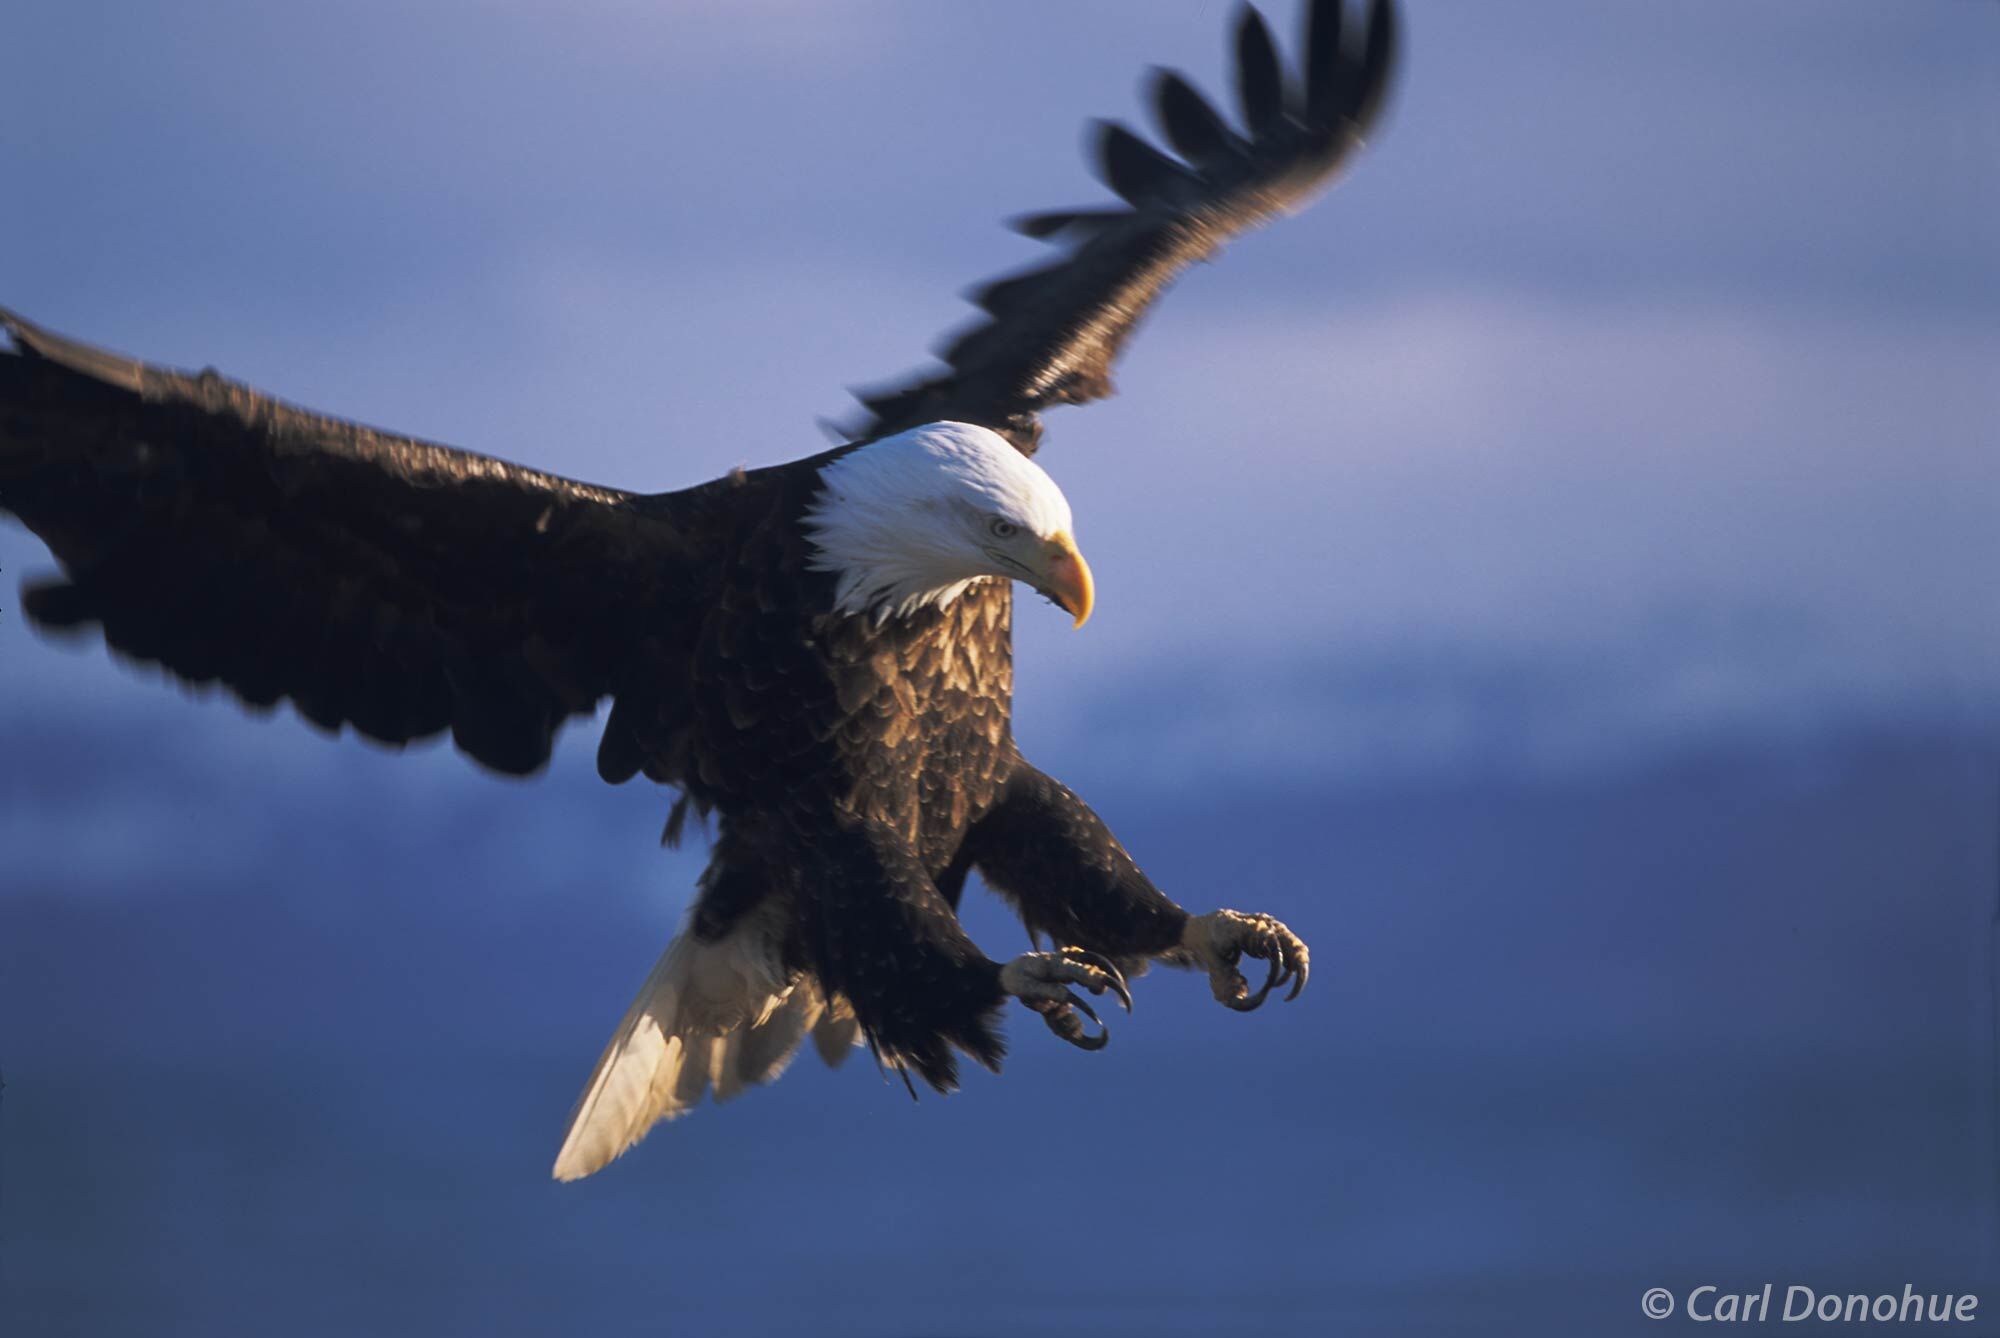 An adult bald eagle in flight coming in for a landing, talons outstretched, near Homer, Alaska. Haliaeetus leucocephalus.